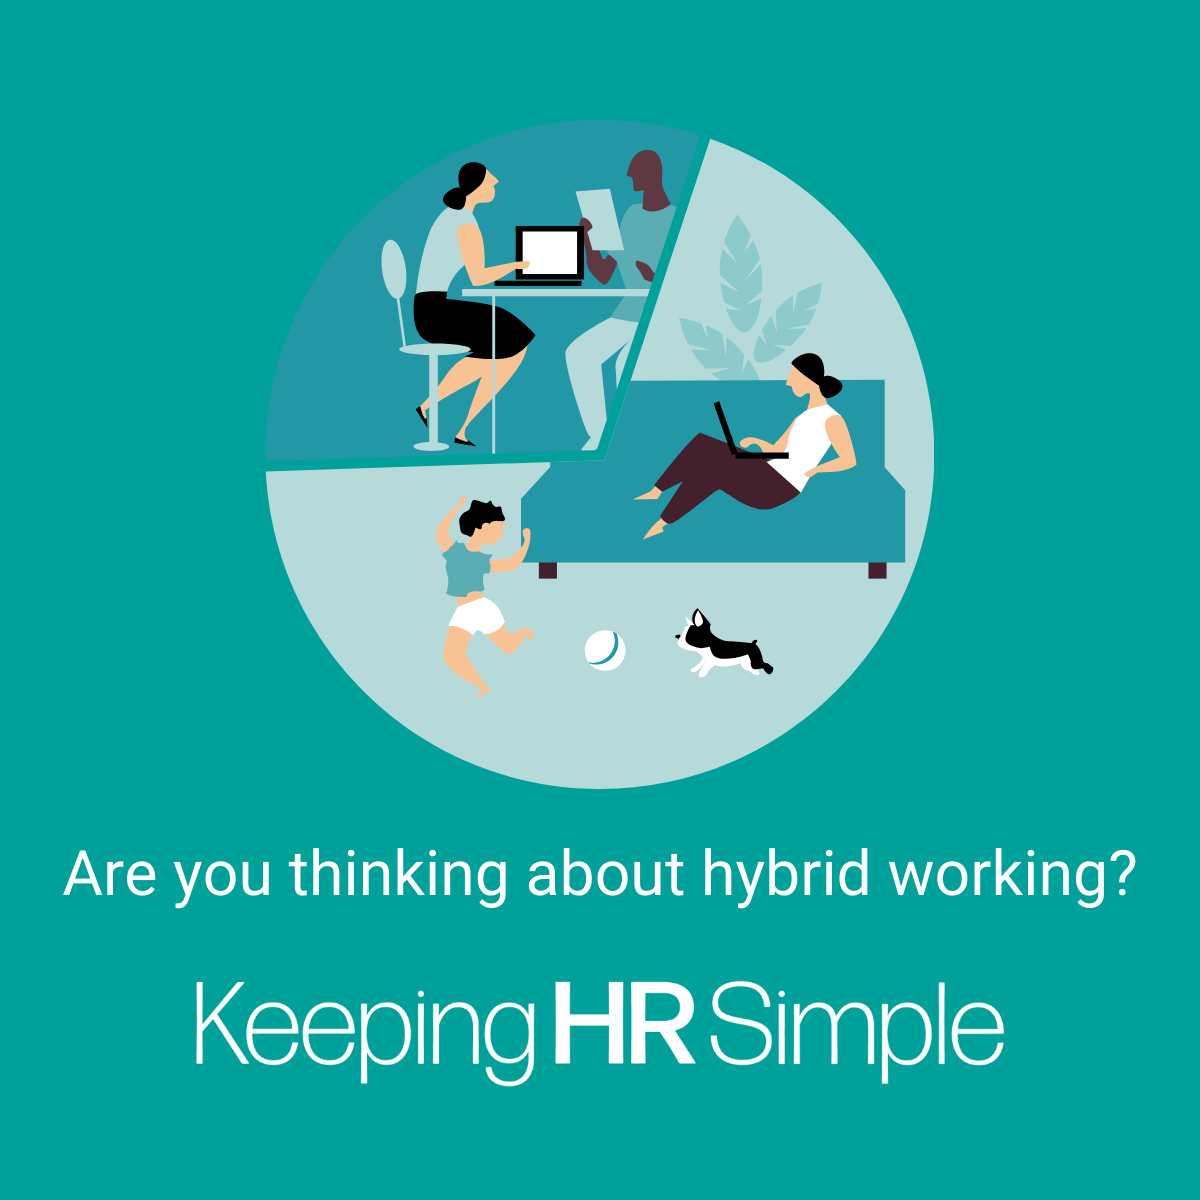 are you thinking about hybrid working?